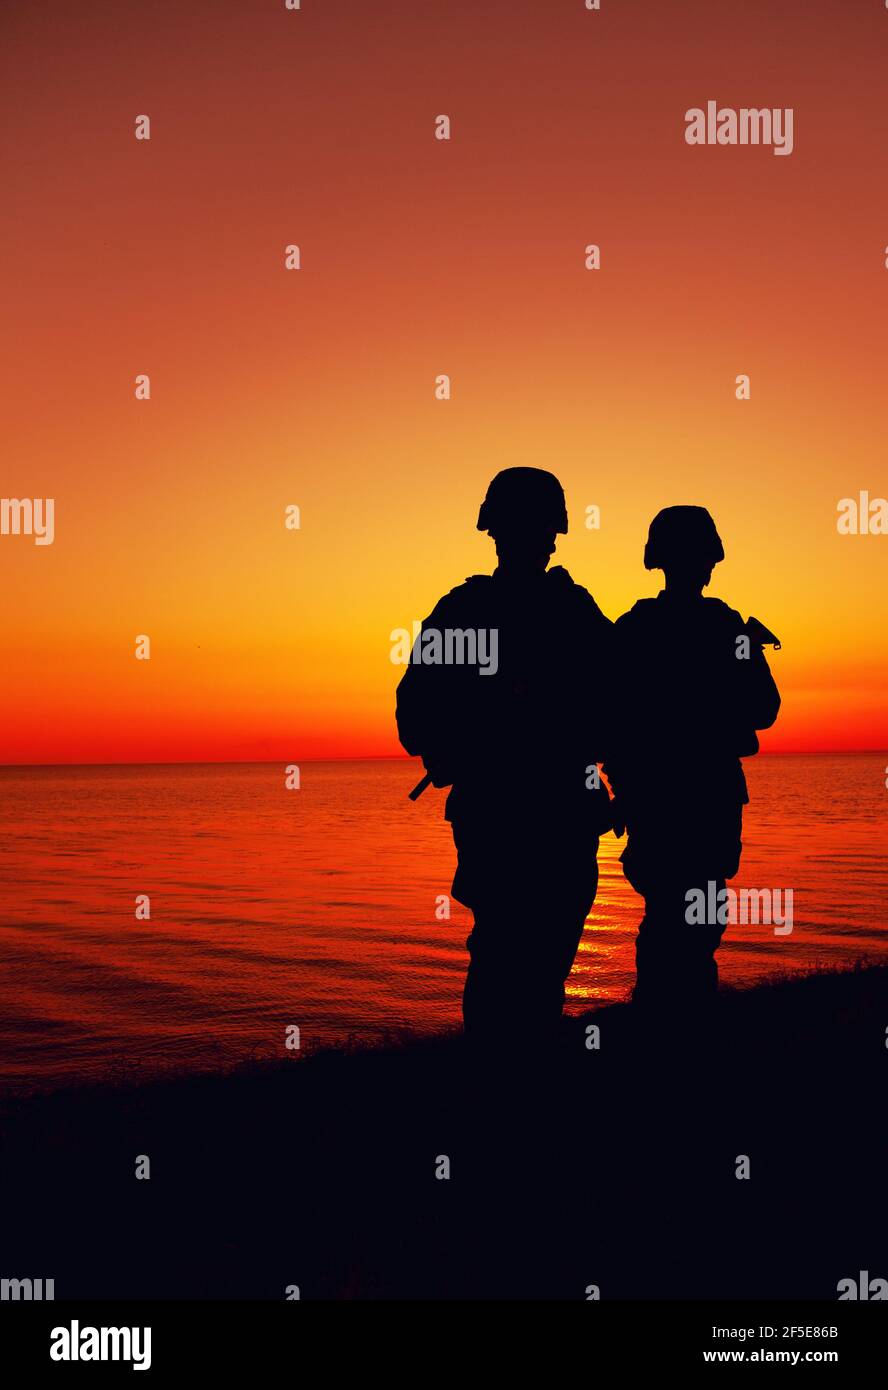 Silhouette of two Marines soldiers, special operations infantrymen or coast guard fighters in uniform and combat helmet, armed service rifles, standing on seashore, patrolling beach at sunset or dawn Stock Photo